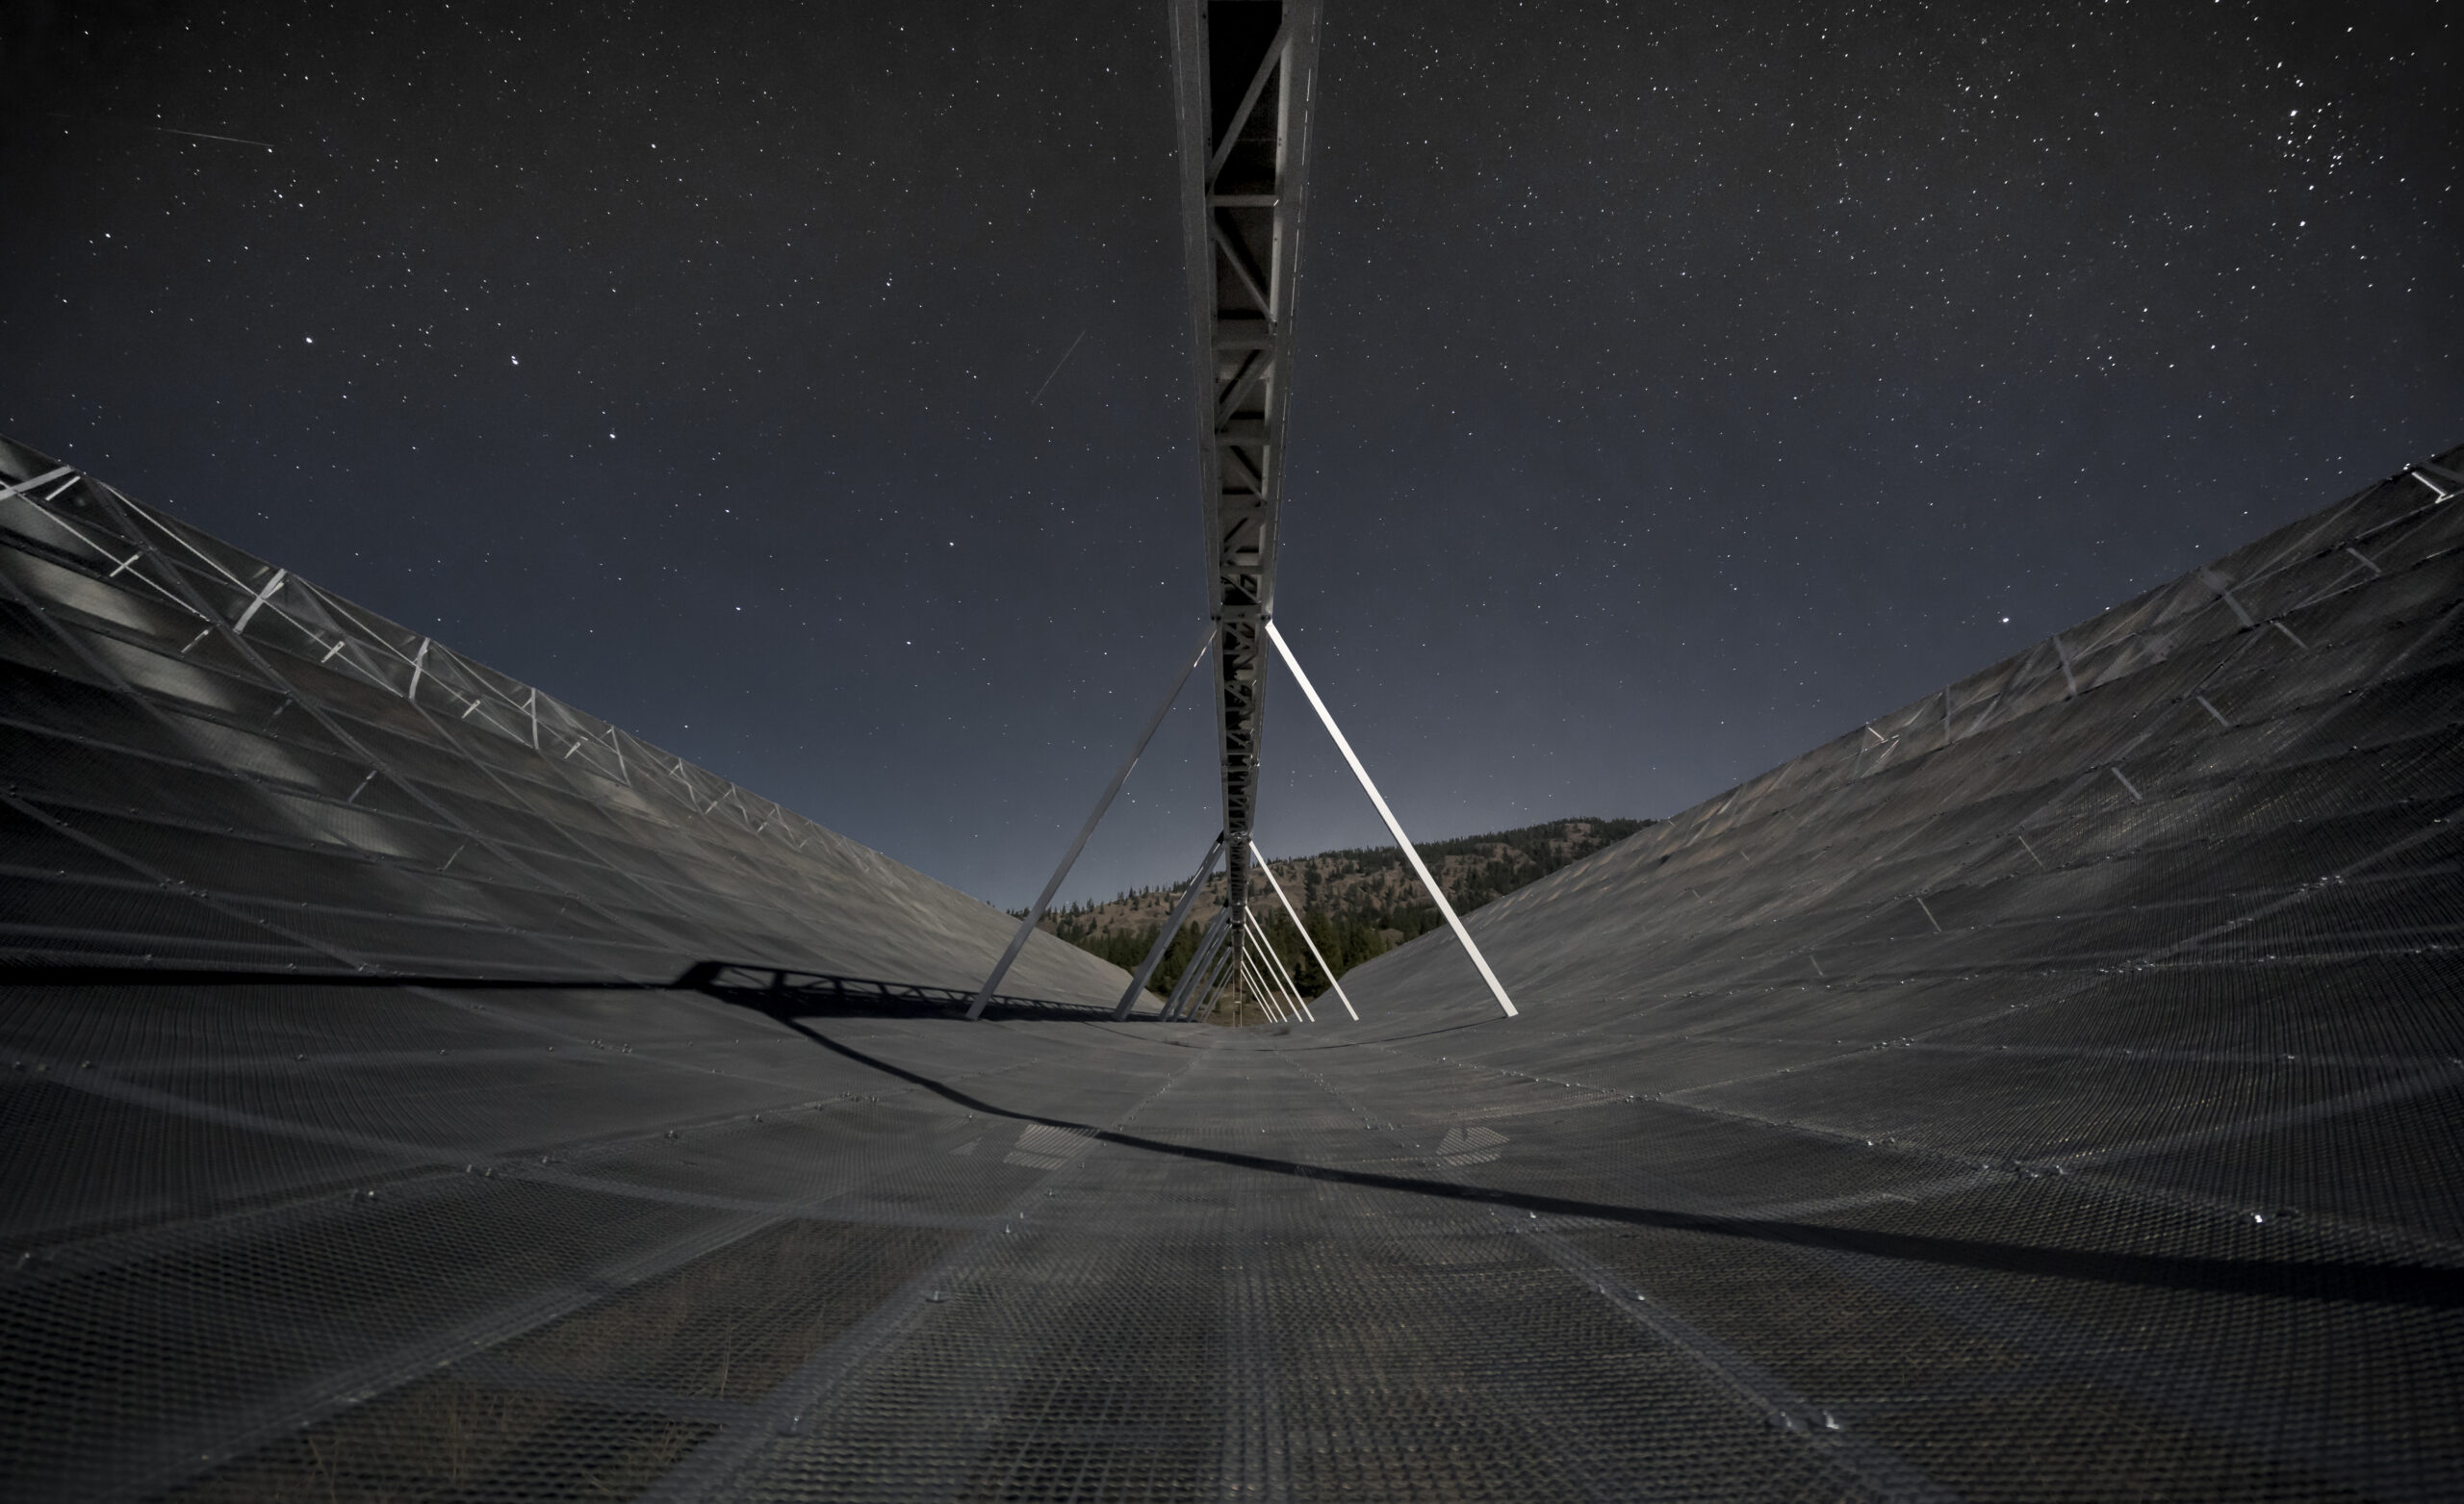 A view from inside the CHIME telescope, showing a grid-like metal floor curving upward. Overhead, the sky is full of stars.